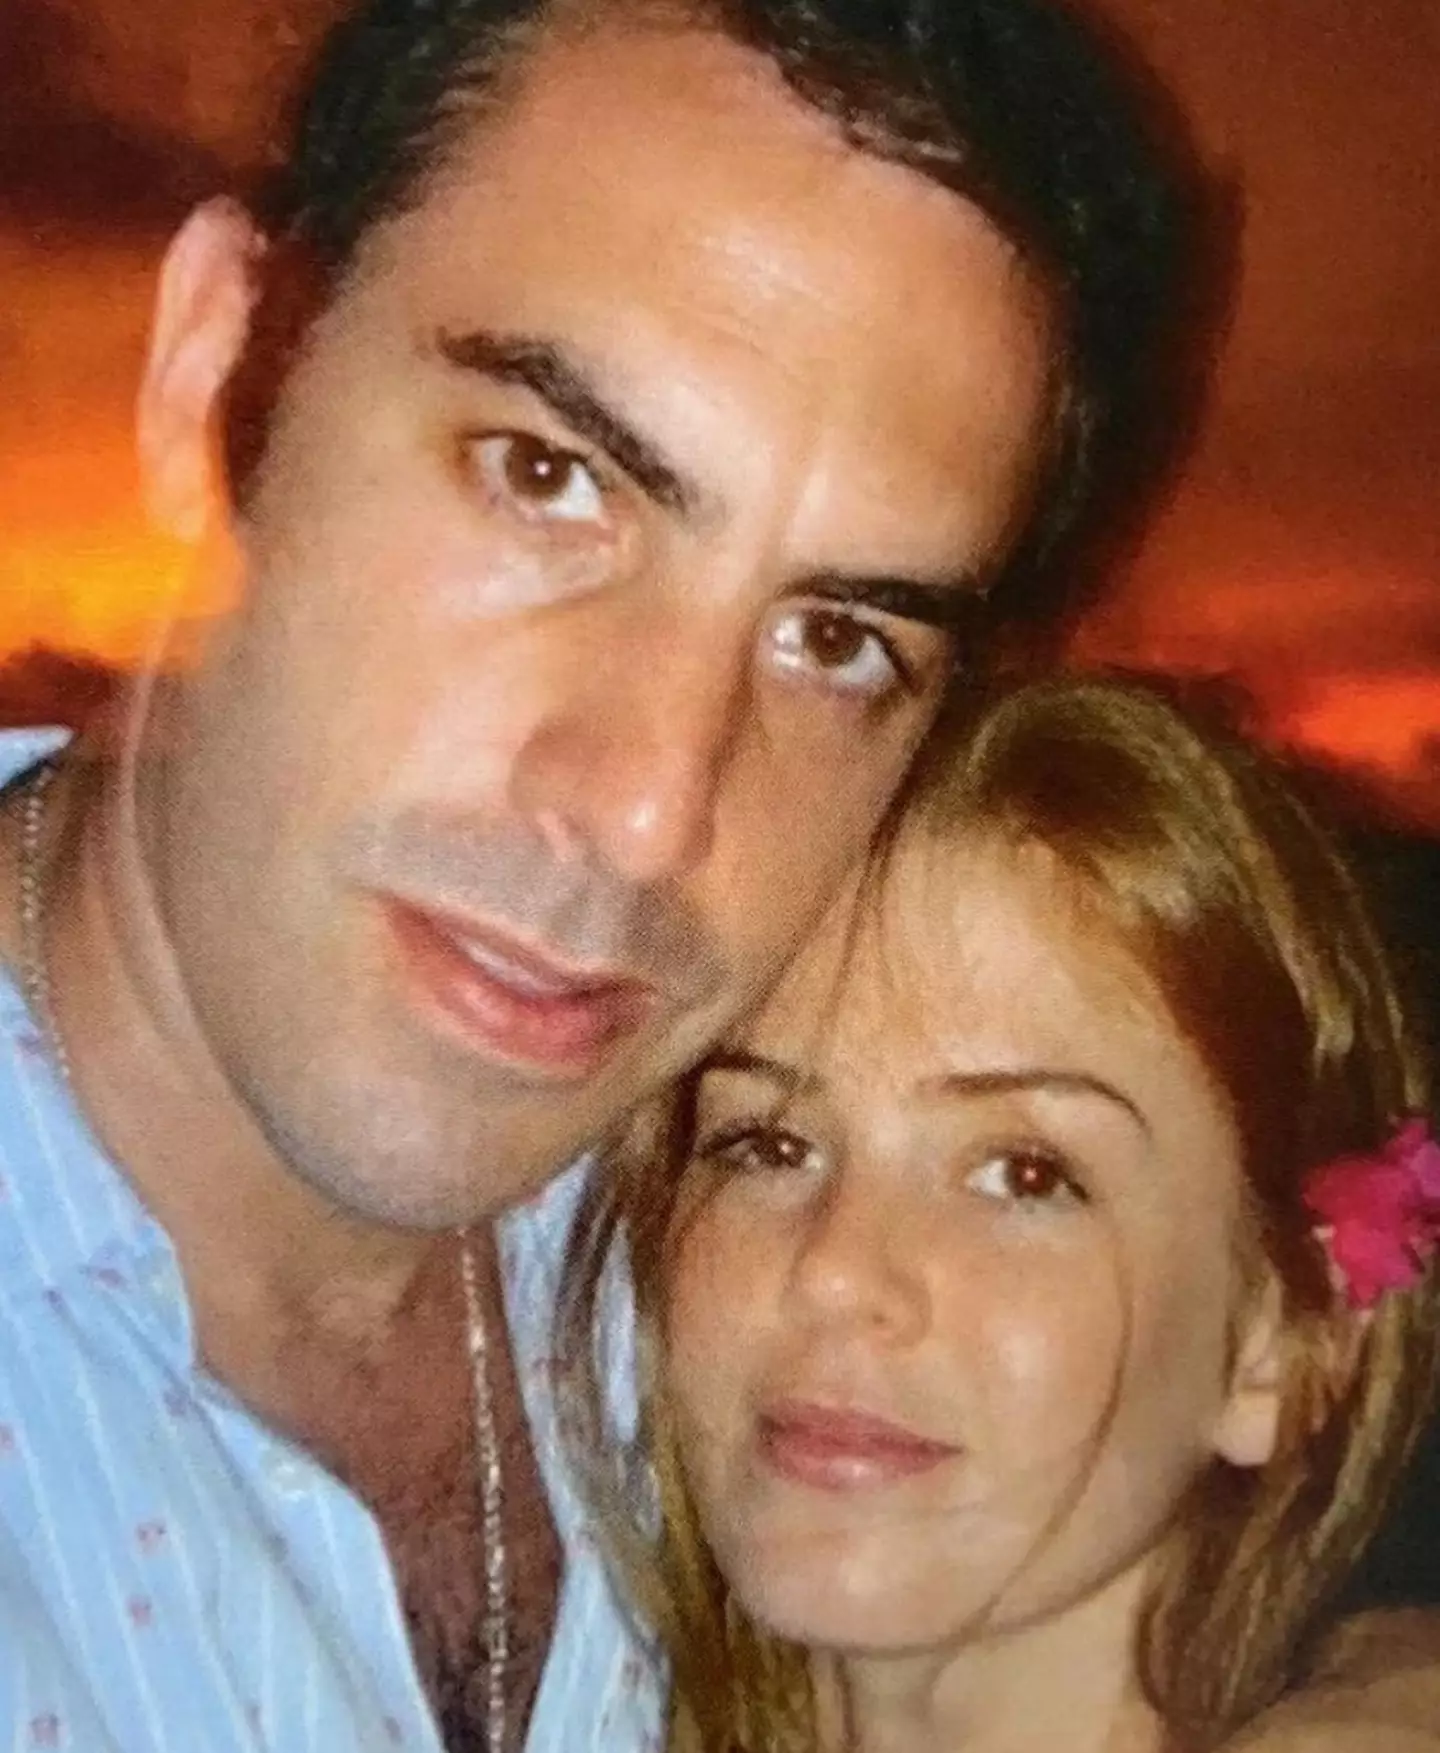 Sacha Baron Cohen and Isla Fisher have been together for more than a decade.